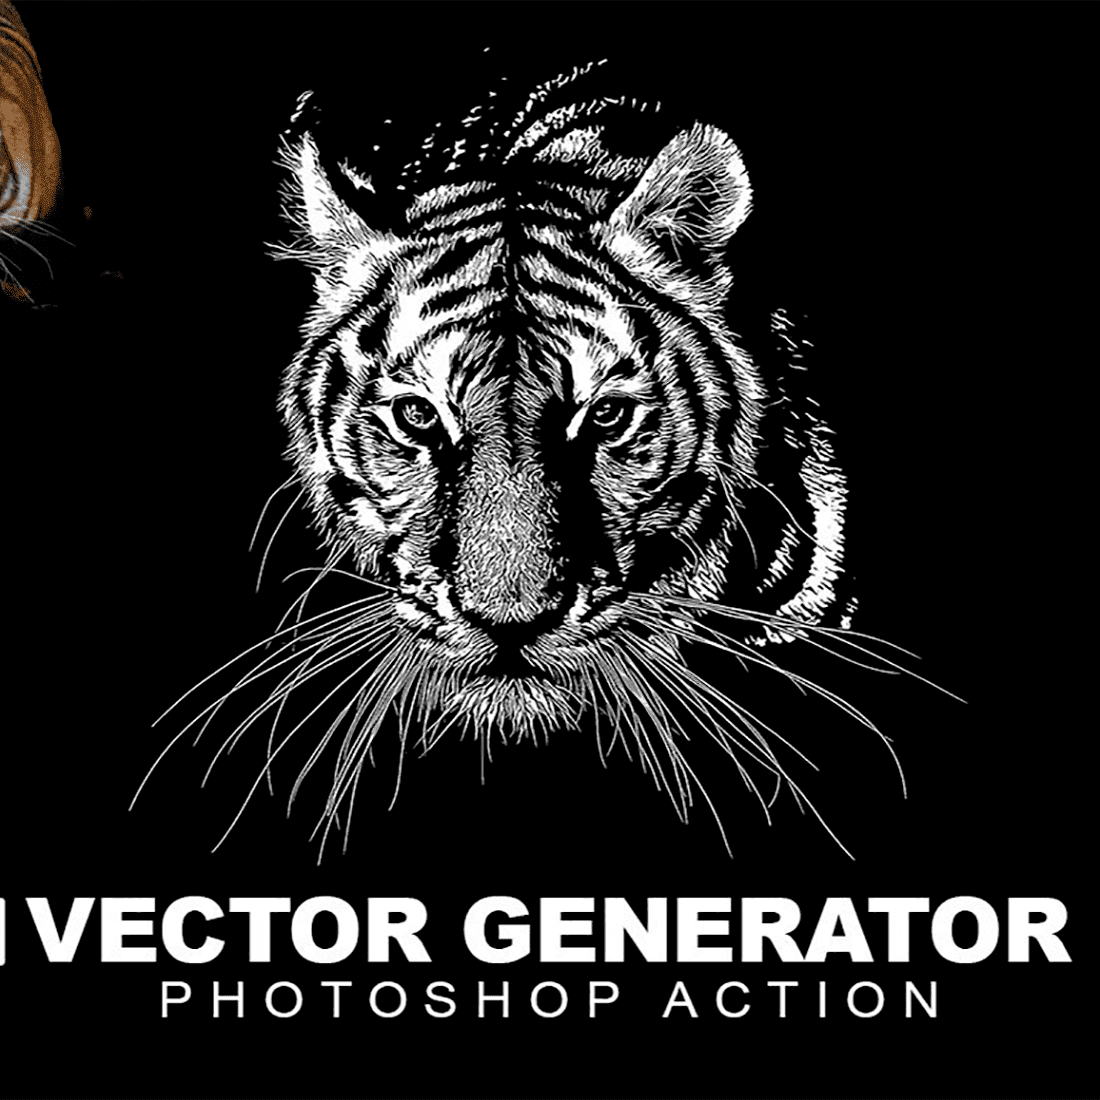 Vector generator photoshop action, main picture 1100x1100.